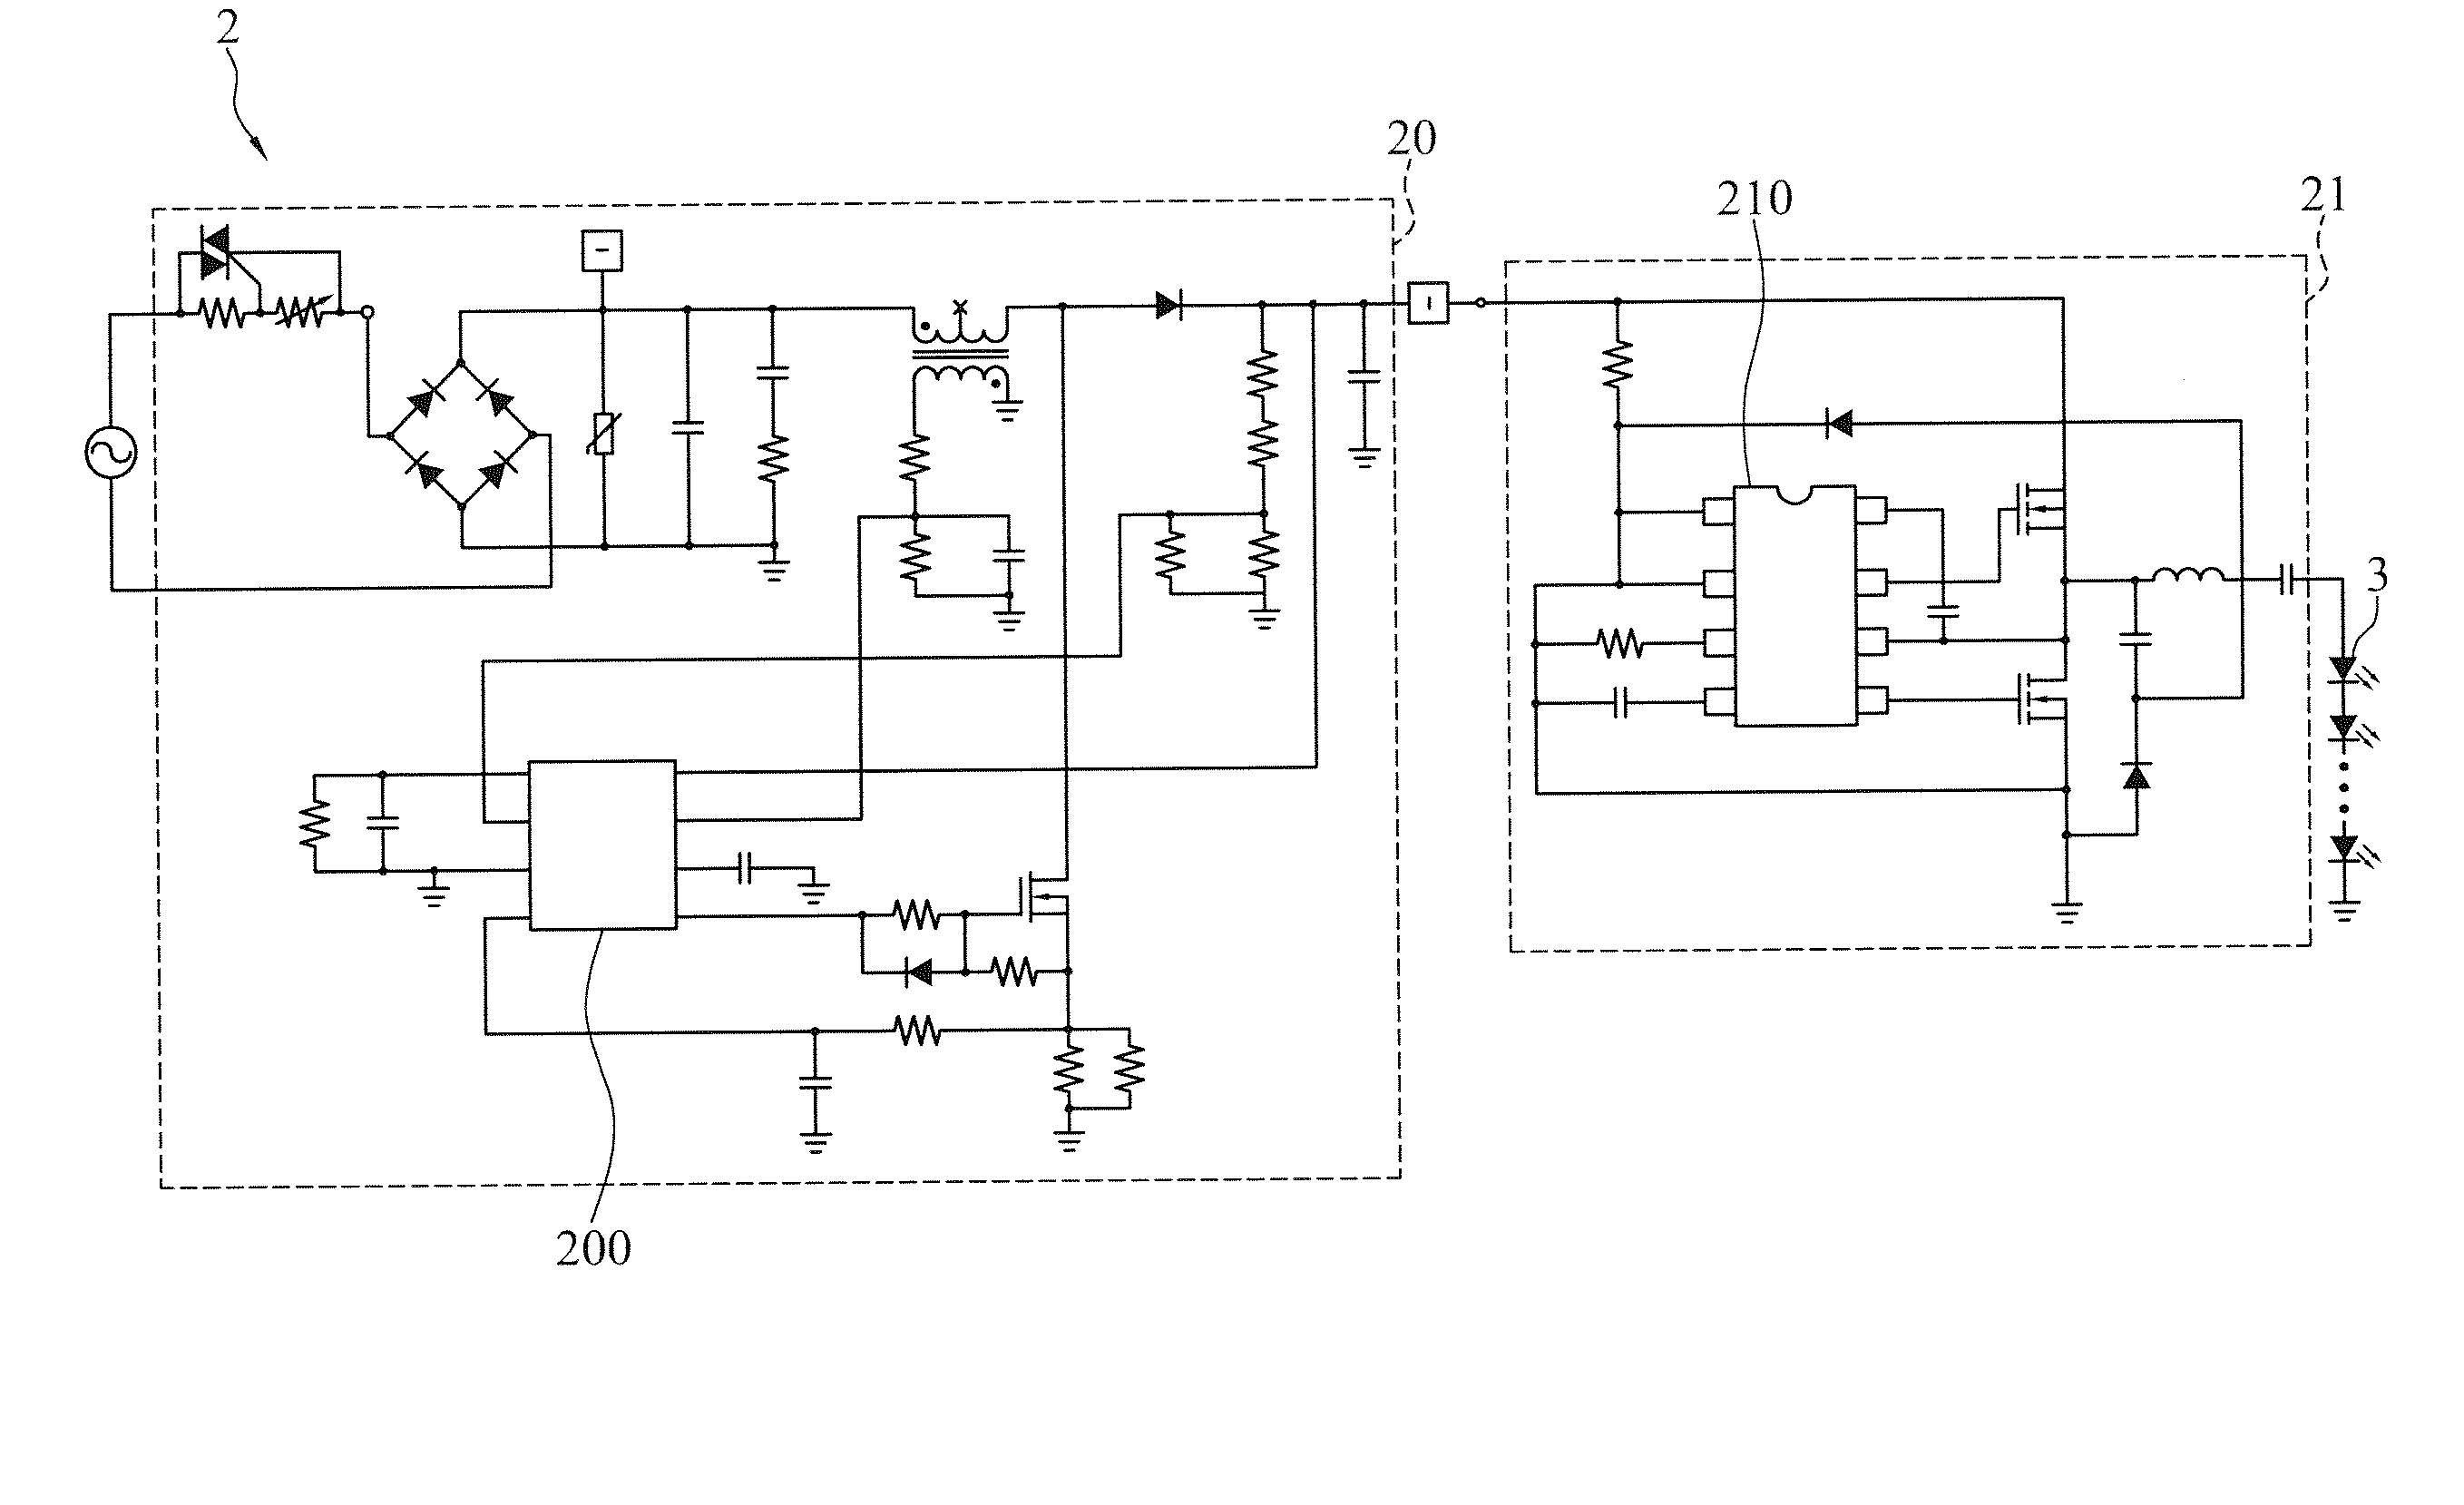 Self-excited triac dimming circuit